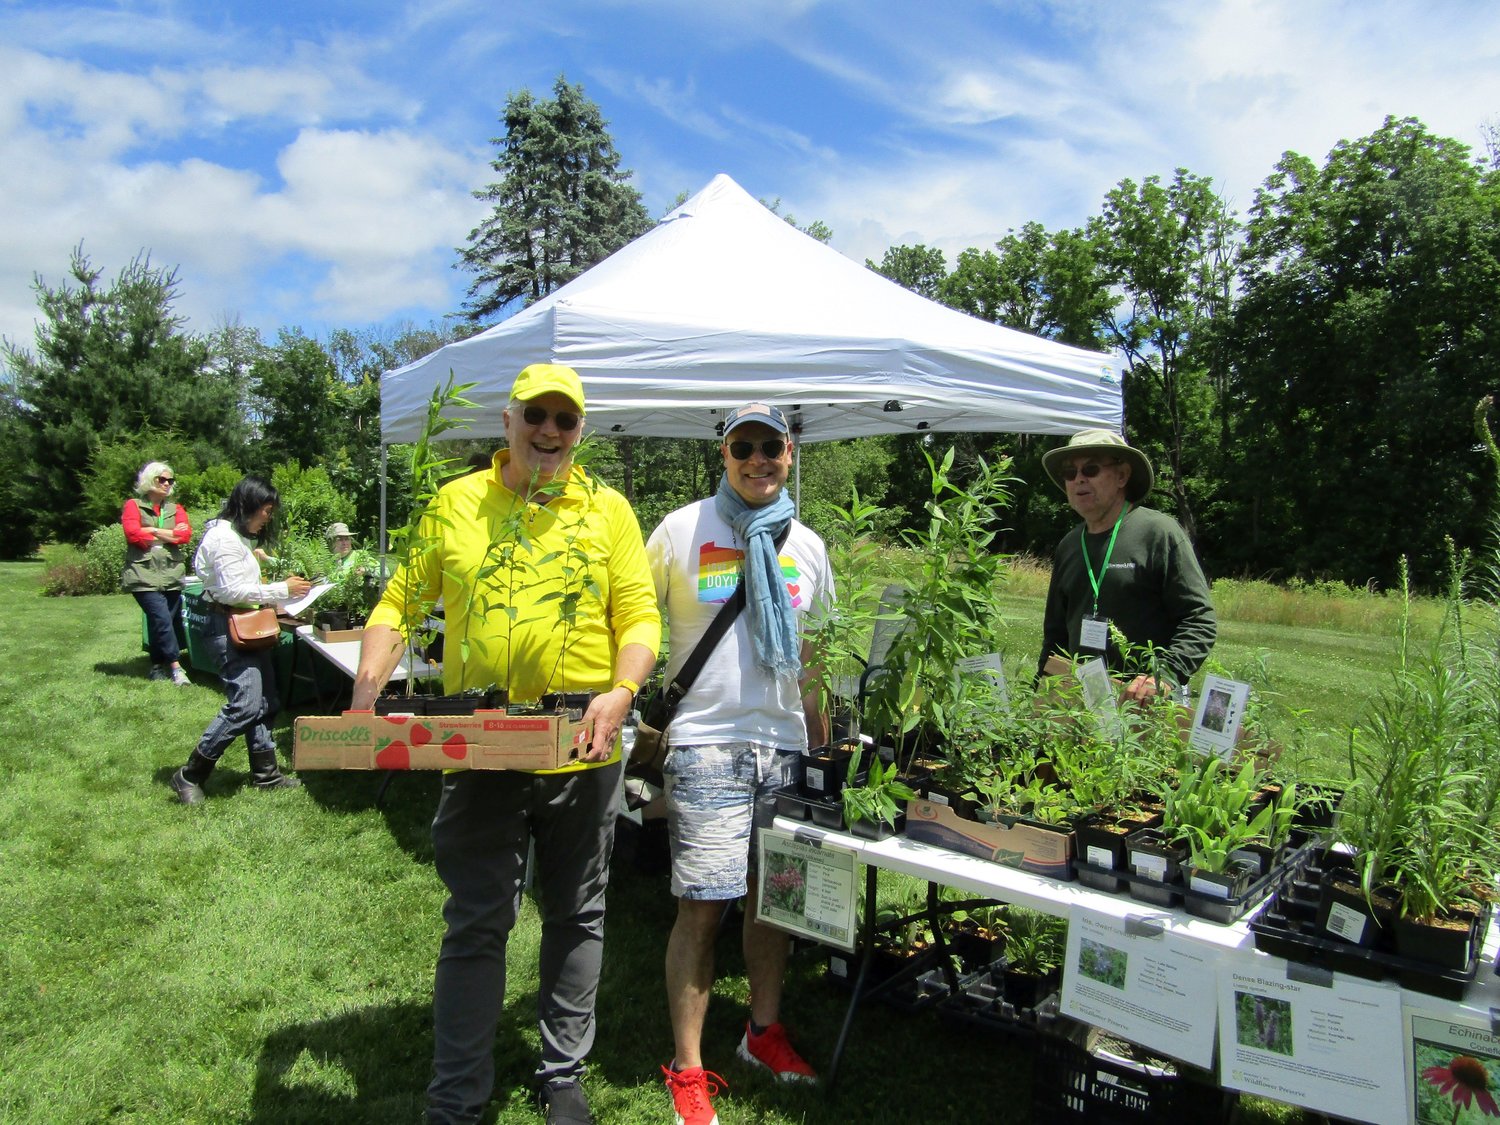 Michael Flanagan and William Hughes purchase native plants from Dave Horne, a Preserve volunteer.